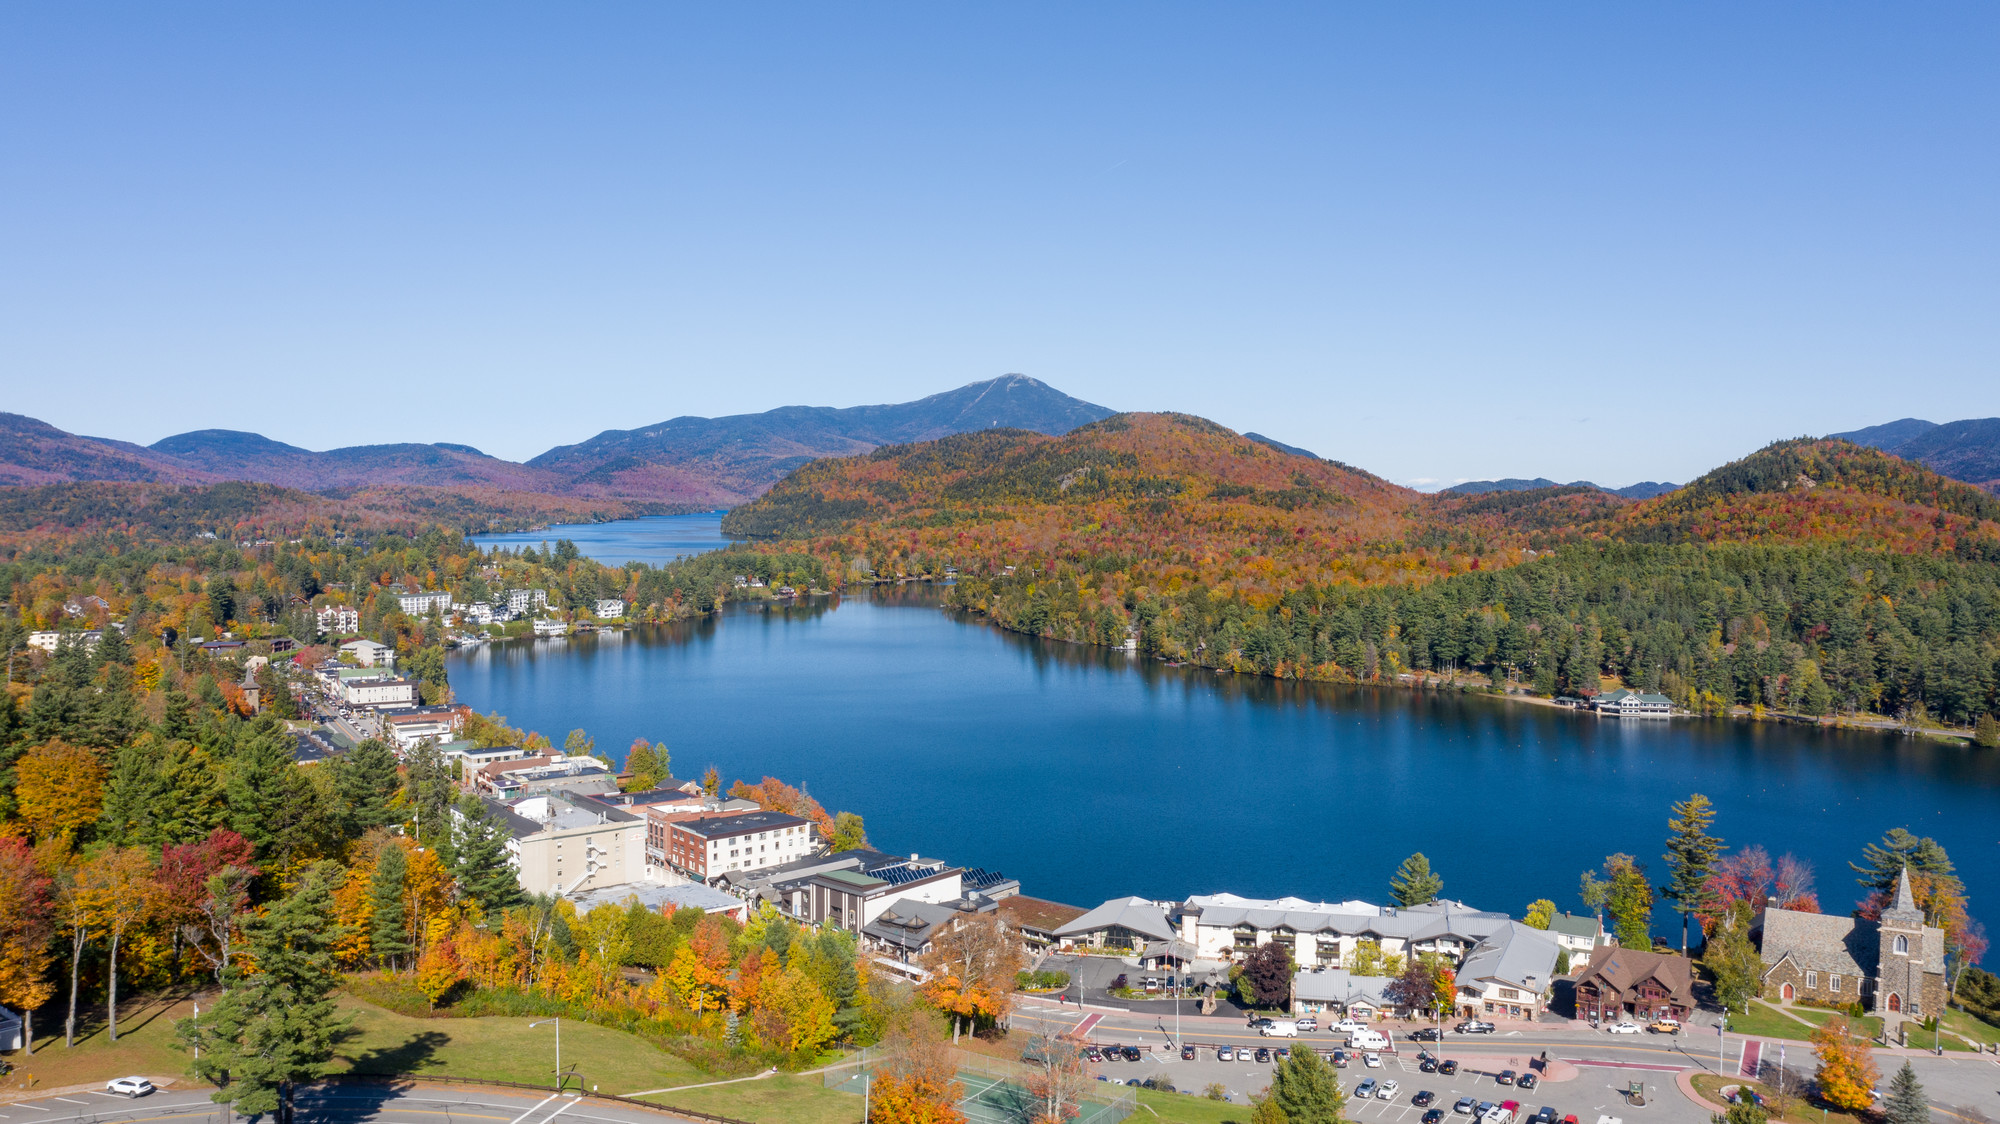 Lake Placid, town and lake, with Whiteface in the background